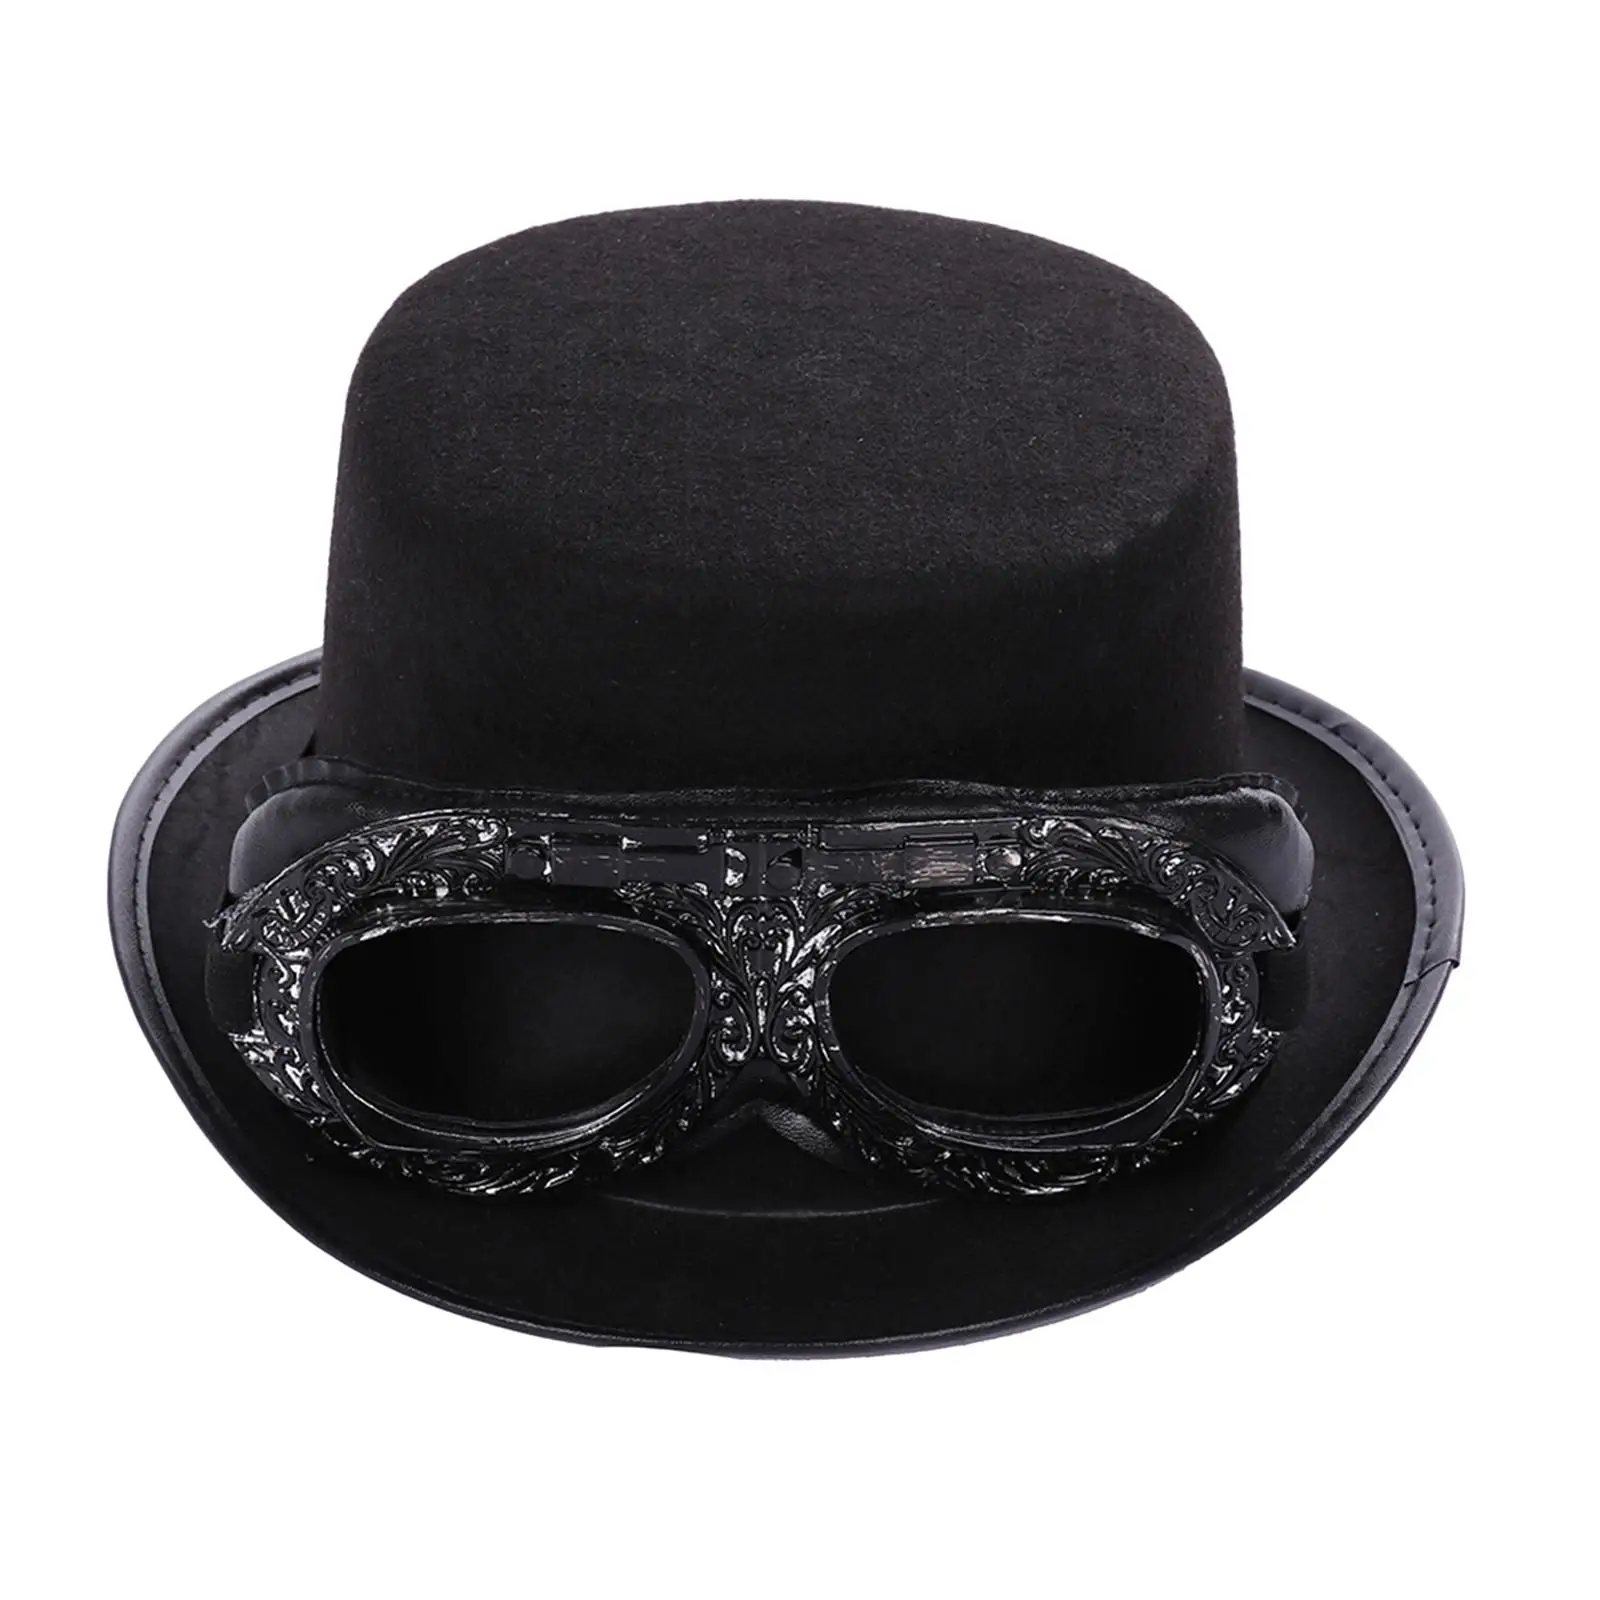 Deluxe Black Steampunk Top Hat with Goggles Punk Costume Hat Gear for Unisex Halloween Party Fancy Dress Costume Accessory